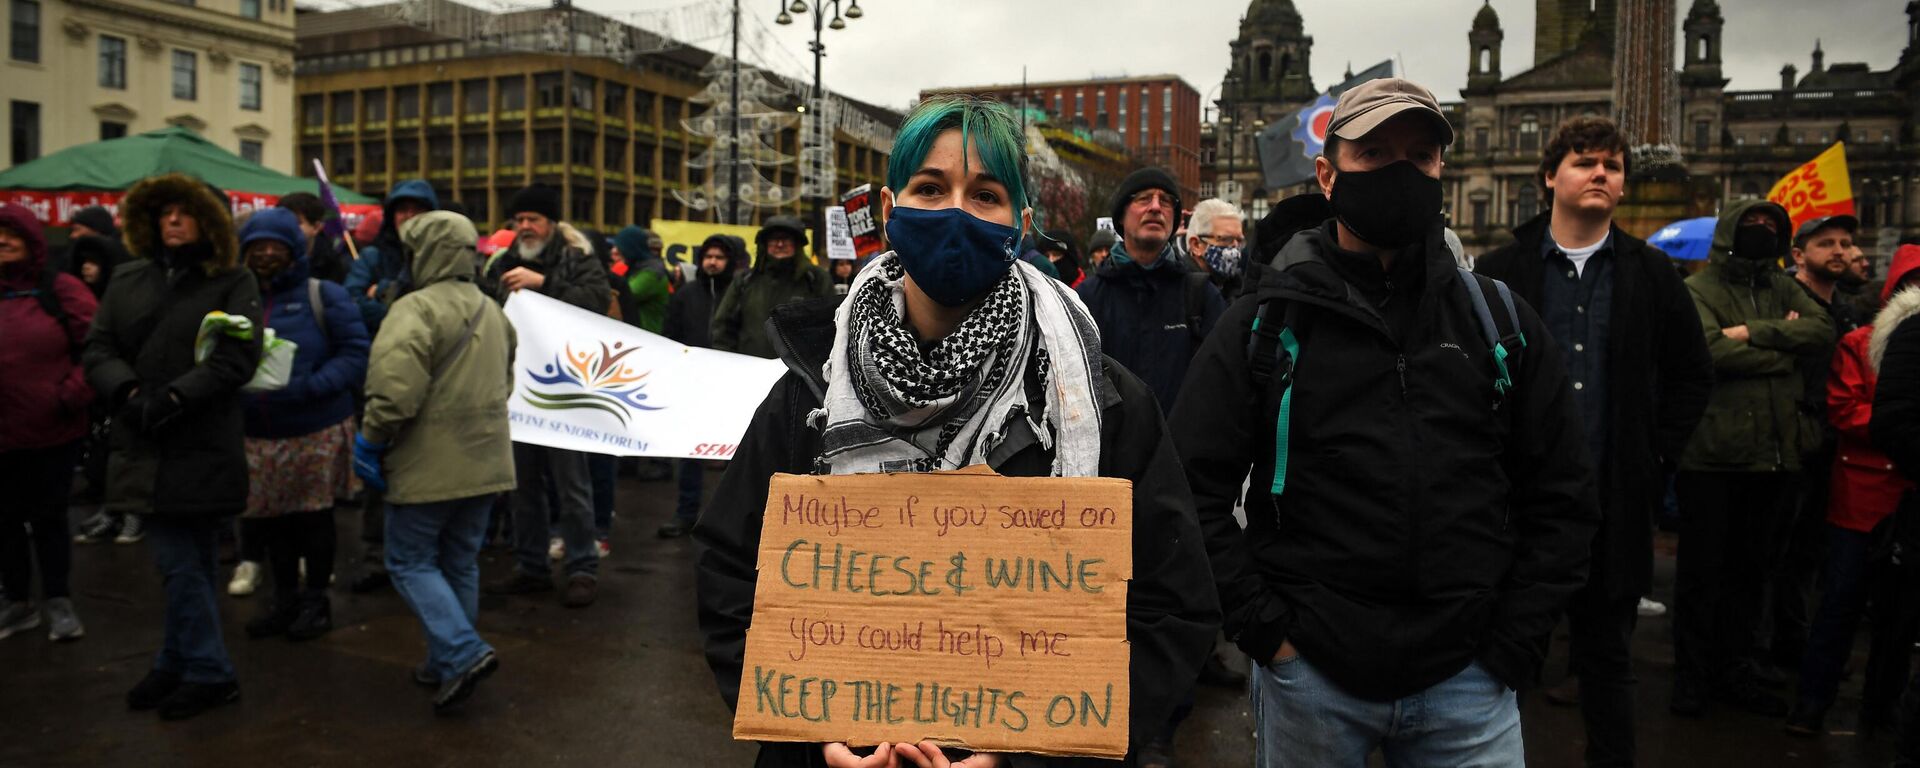 Demonstrators hold up placards as they take part in a march organised by The People's Assembly to demand action to tackle the cost of living crisis in Glasgow, Scotland on February 12, 2022. - Sputnik International, 1920, 12.01.2023